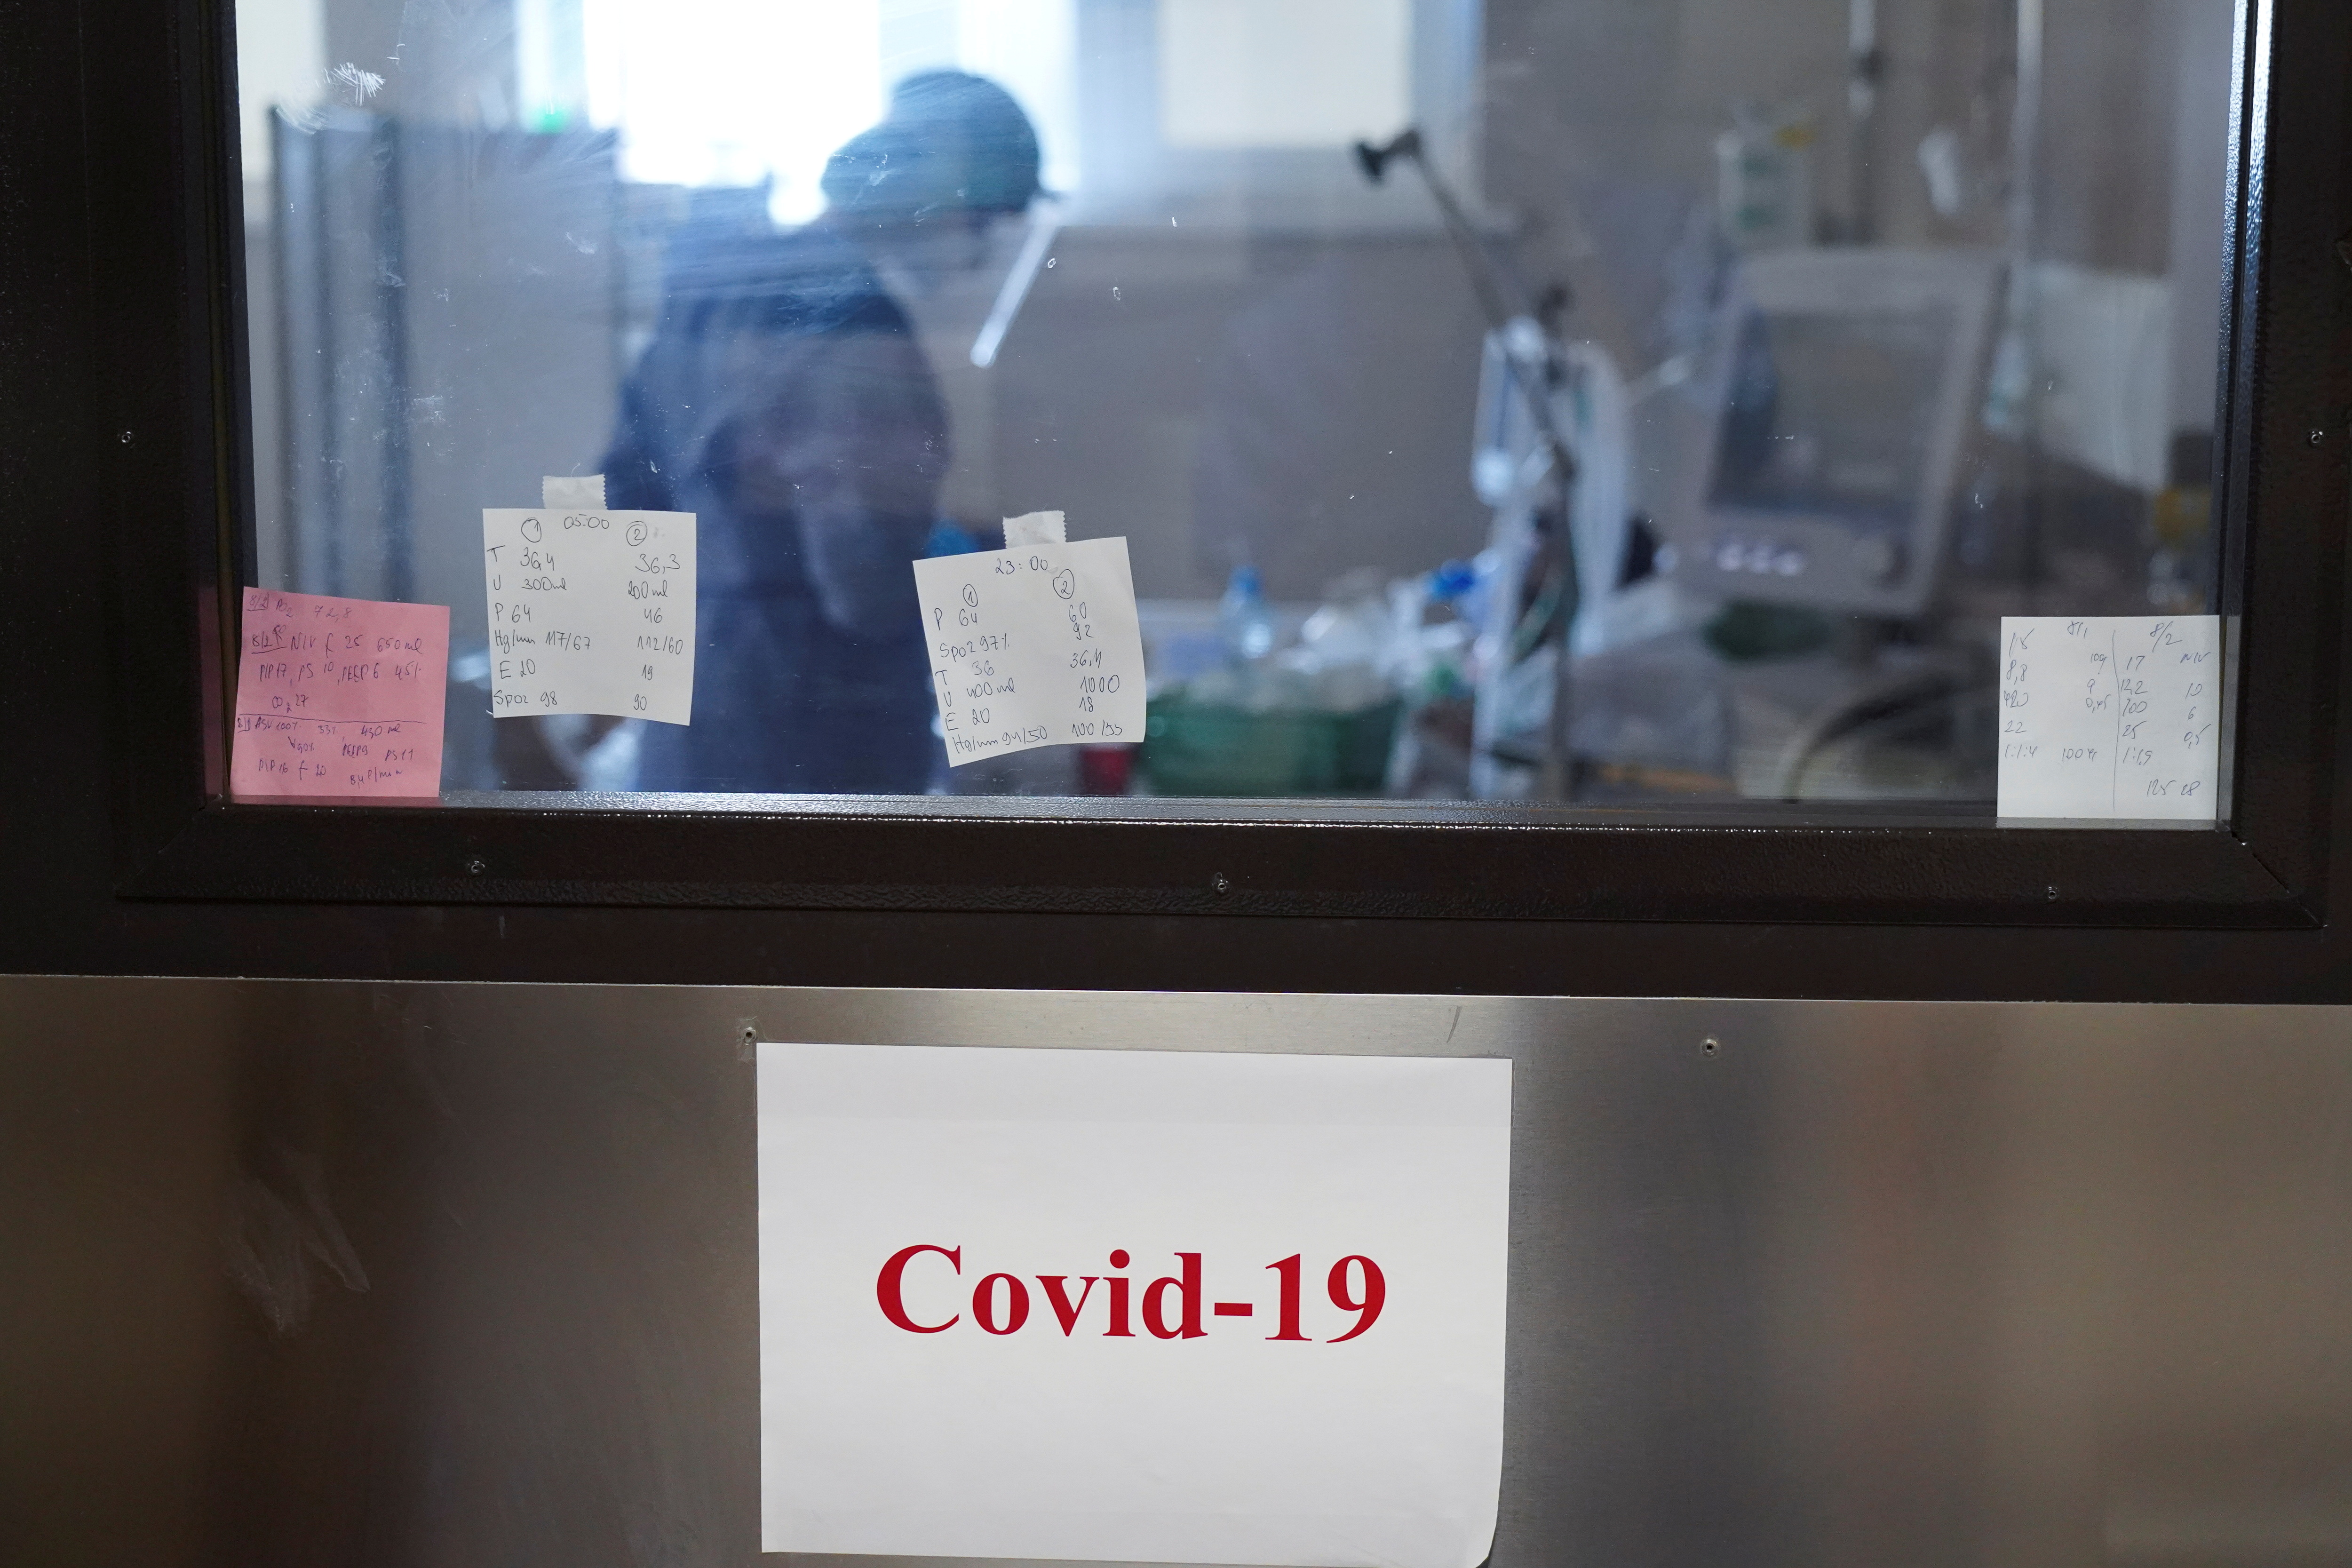 A medical specialist attends to a patient suffering from the coronavirus disease (COVID-19) at the intensive care unit (ICU) of Toxicology and Sepsis clinic of the Riga East Clinical University Hospital in Riga, Latvia. Picture taken on October 29, 2021. REUTERS/Janis Laizans/File Photo